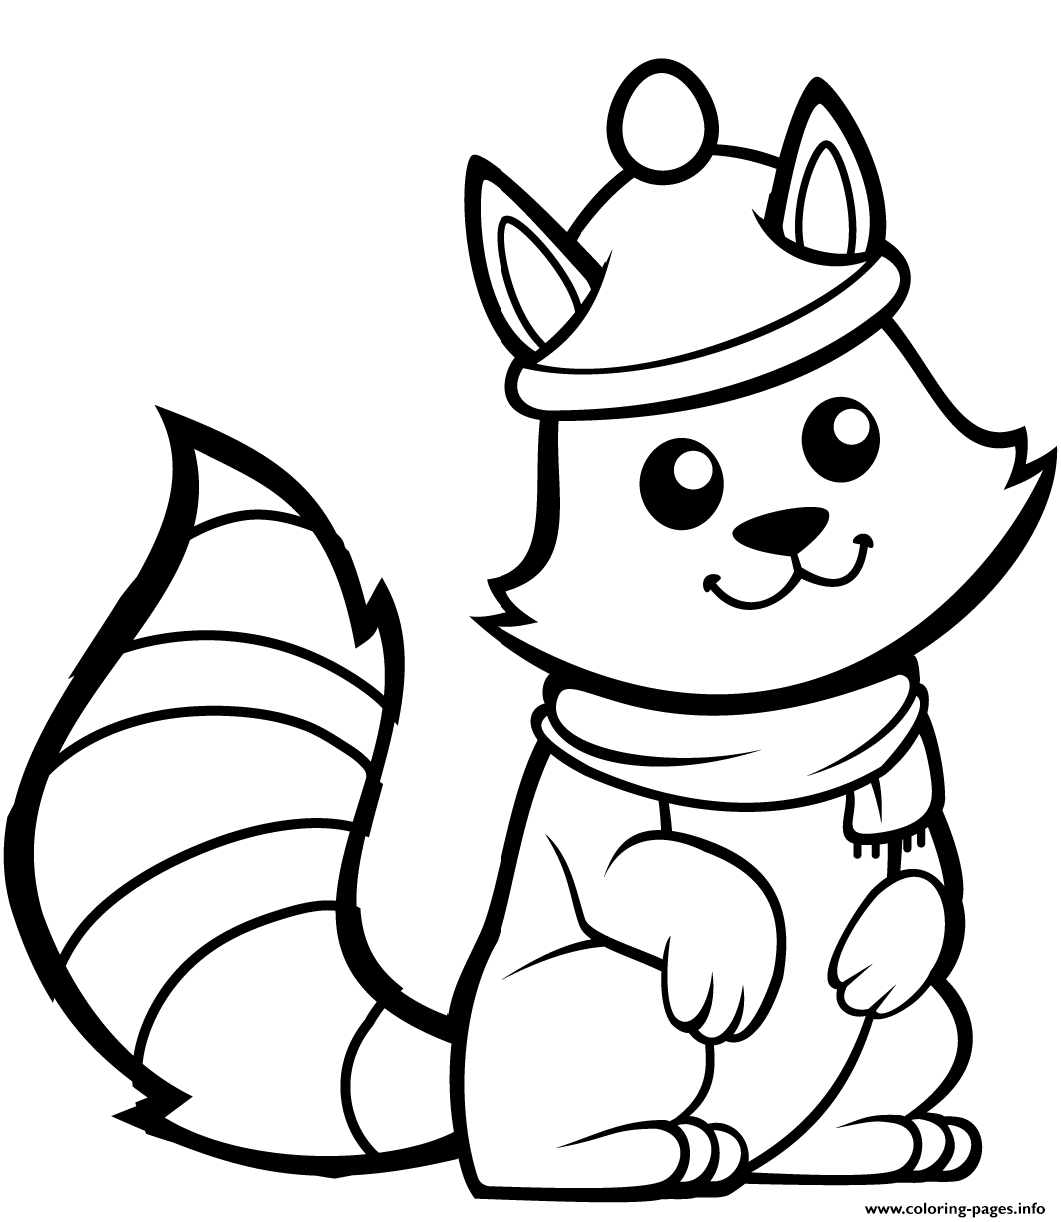 Funny Squirrel In A Hat coloring